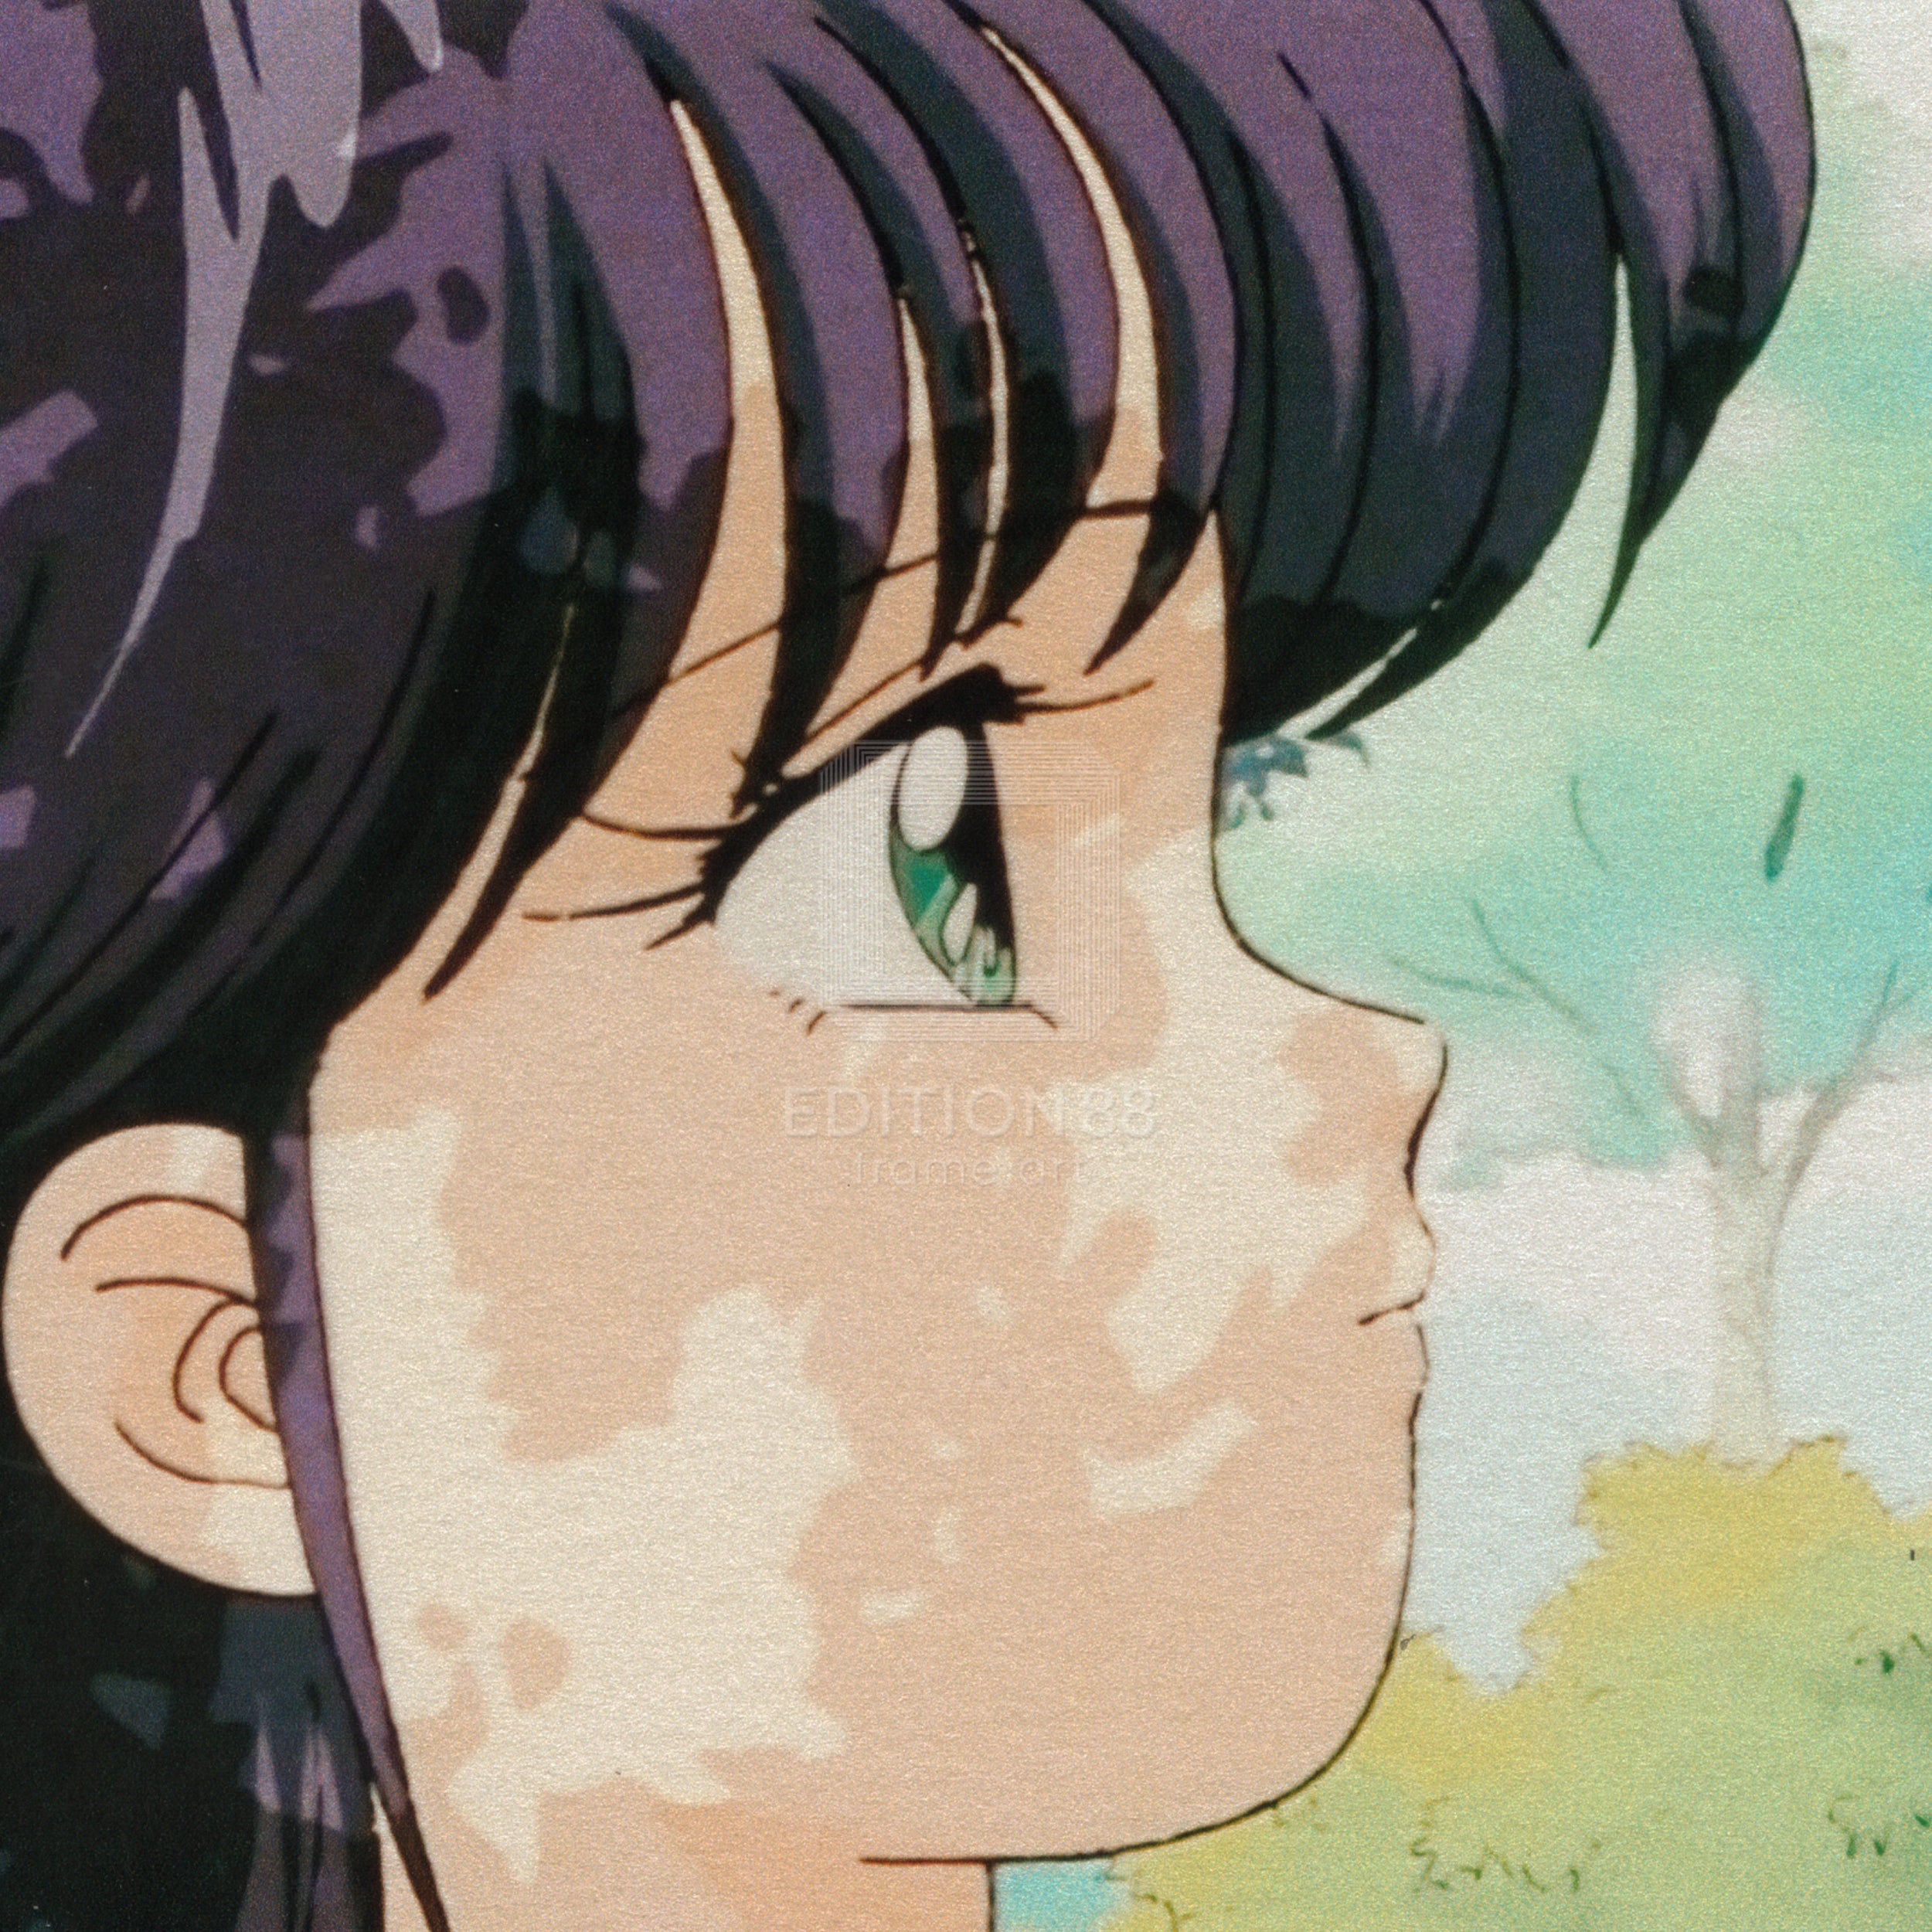 Kimagure Orange Road, 88Filmgraph #13, Episode48 -I Found Love! and Repeat From Beginning.